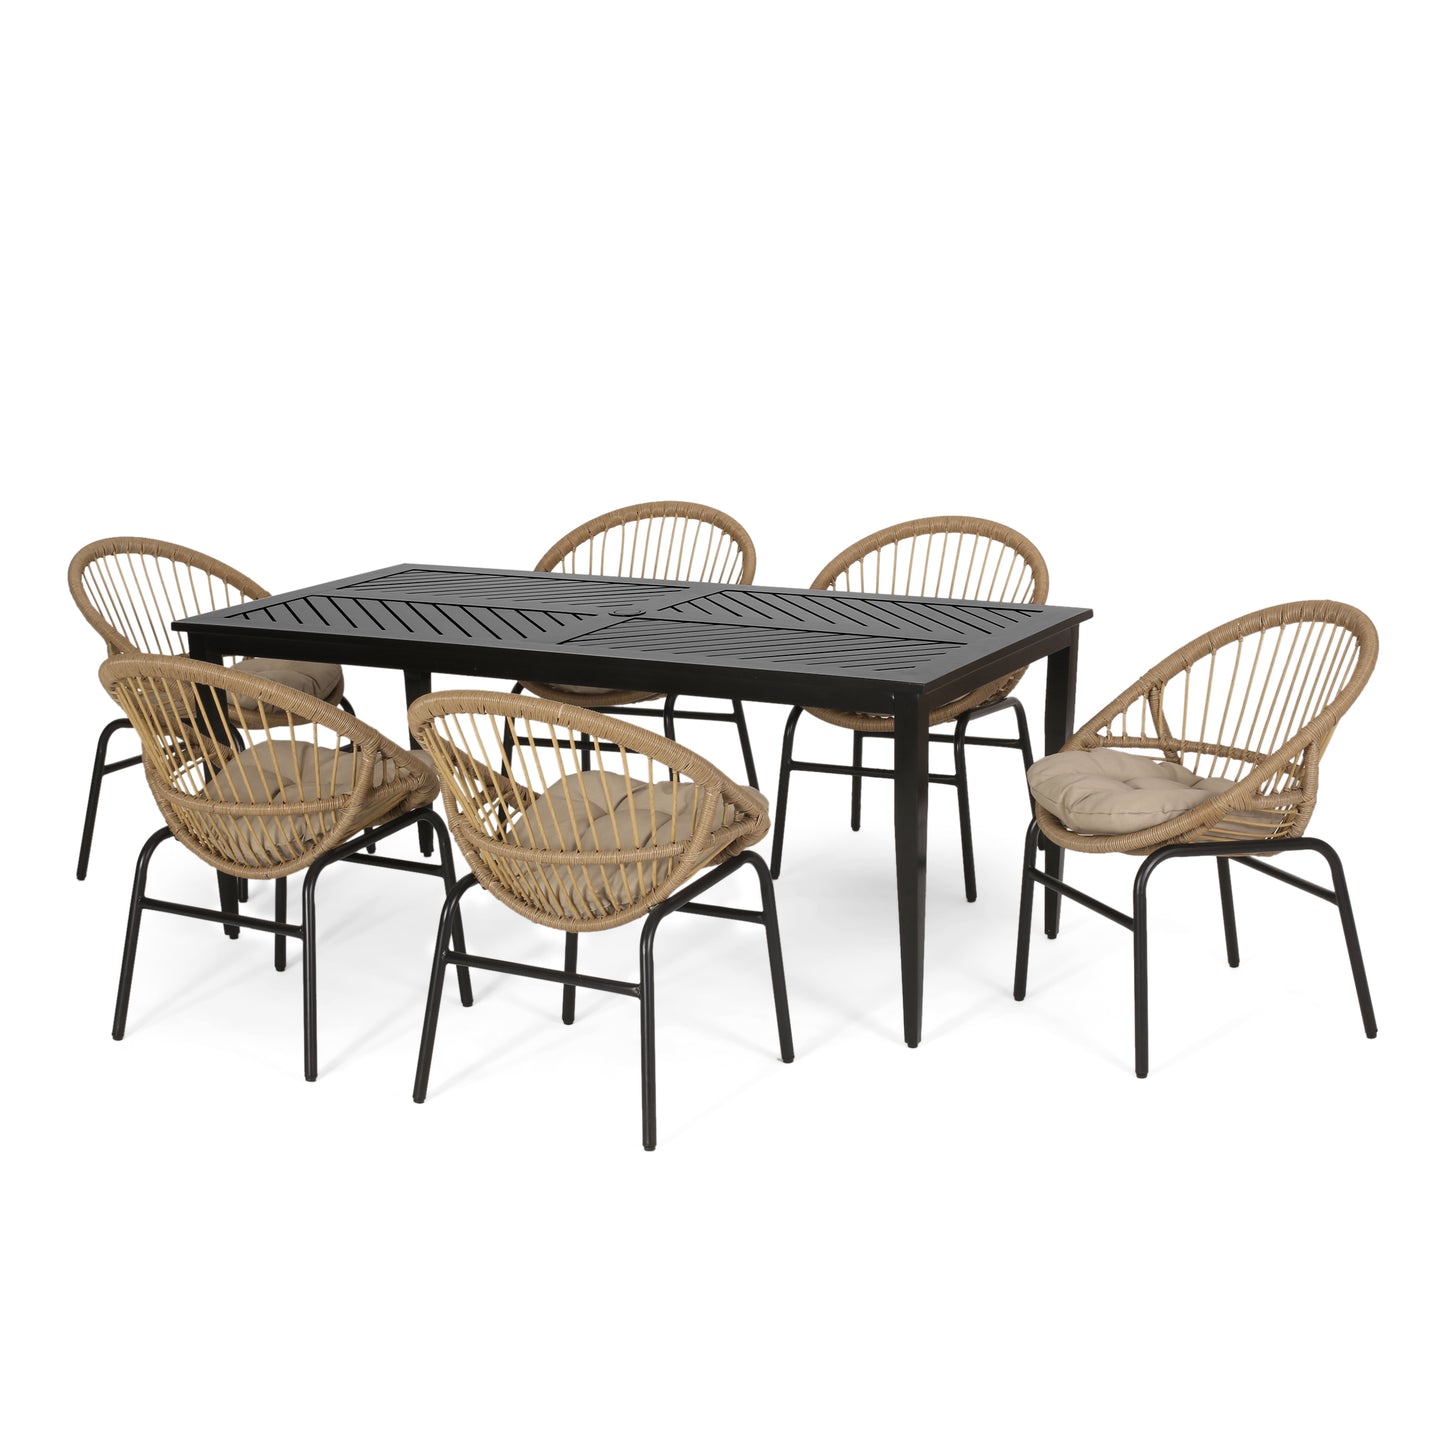 Dero Outdoor Wicker and Aluminum 7 Piece Dining Set with Cushion, Light Brown, Beige, and Matte Black